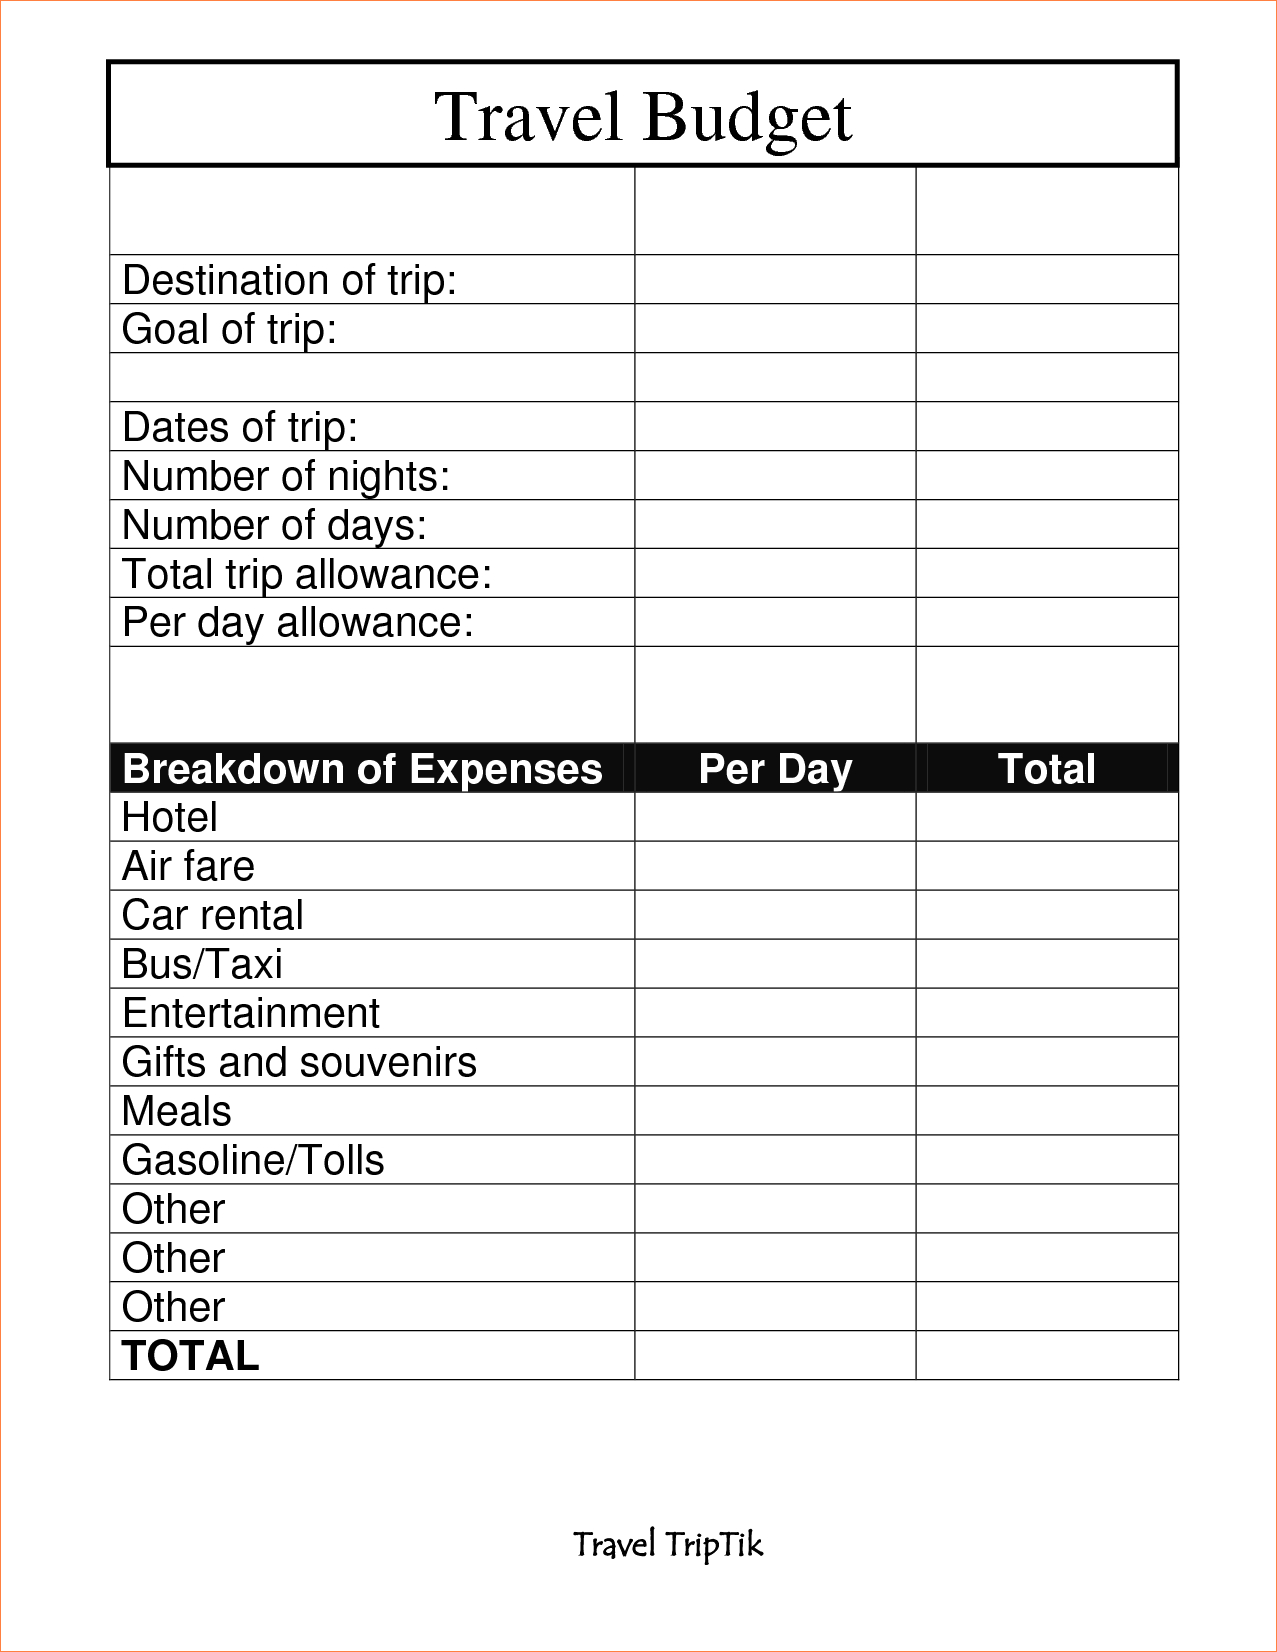 travel expenses meaning translation